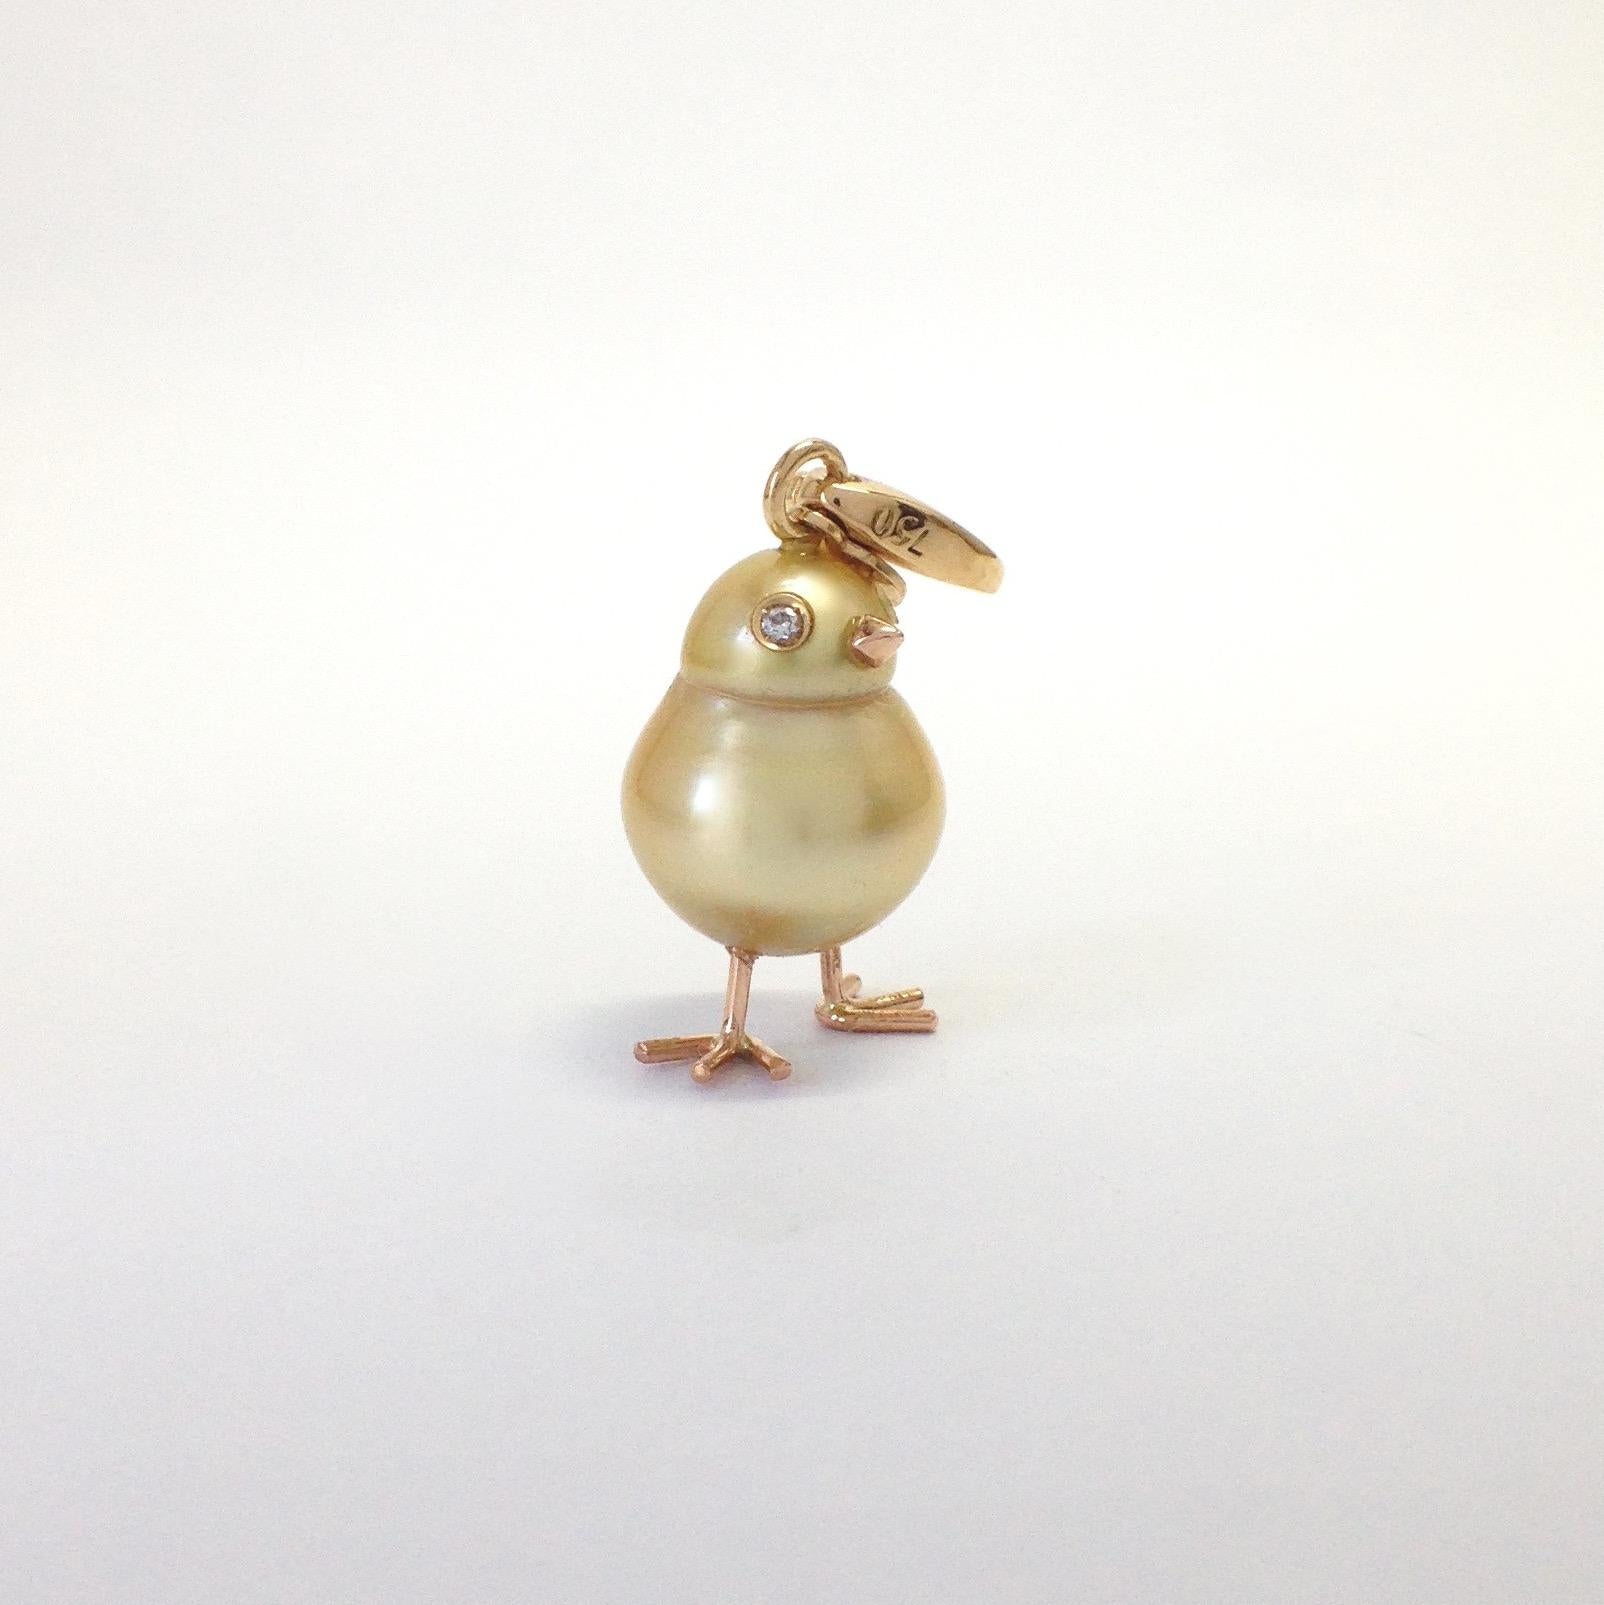 A beautiful Australian pearl has been carefully crafted to make a chick. Its natural y
He has his two legs, two eyes encrusted with two white diamonds and his beak. 
The gold is yellow and is red gold for legs and beak.
The ring for the necklace is